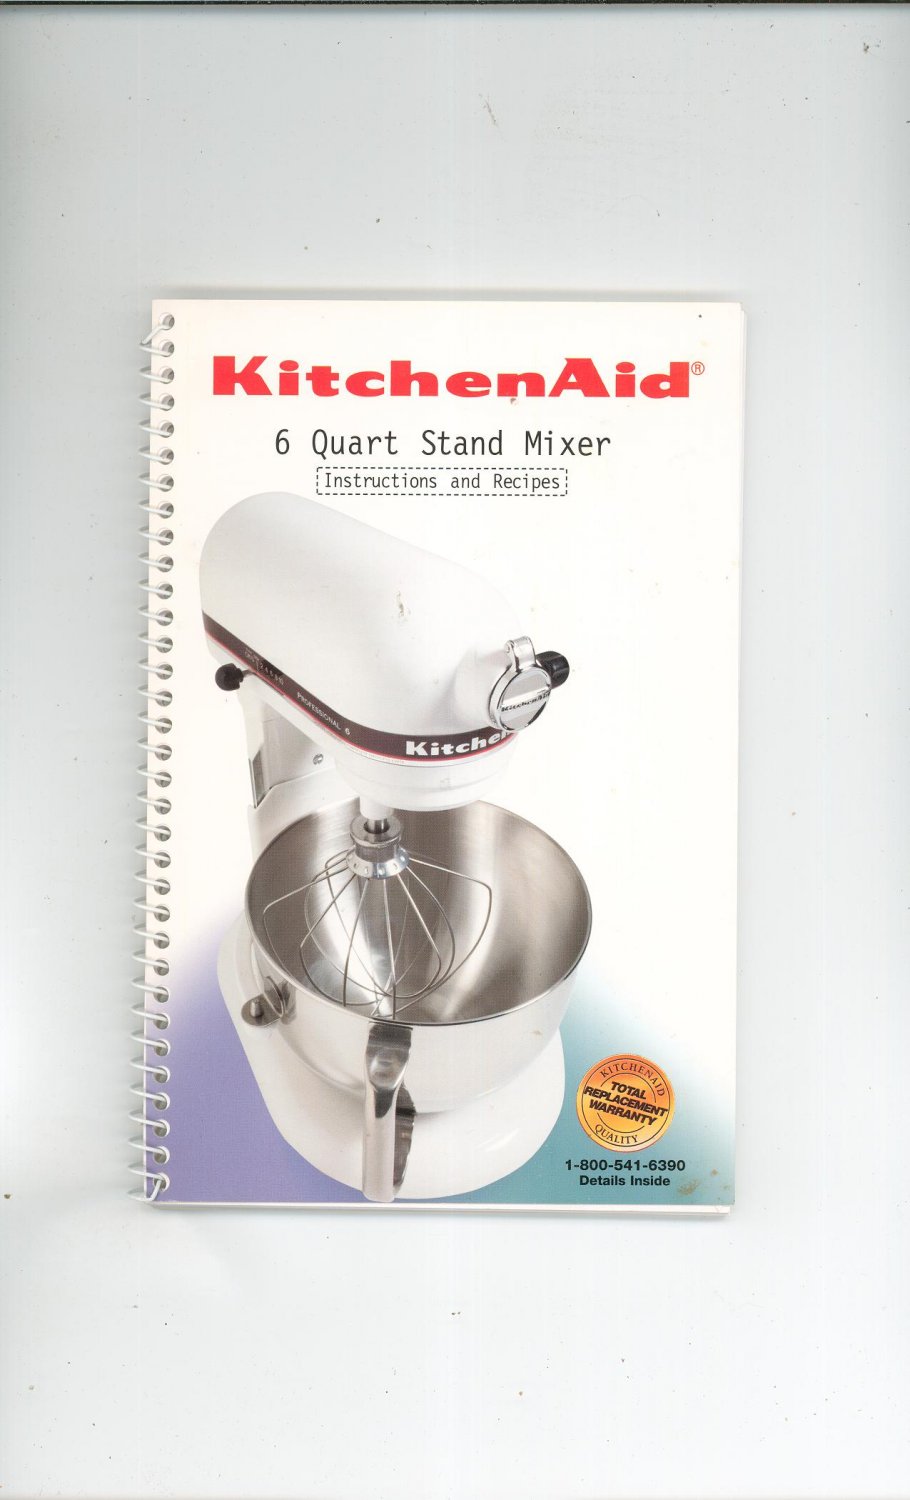 KitchenAid Stand Mixer Recipes and Instructions Book Cookbook